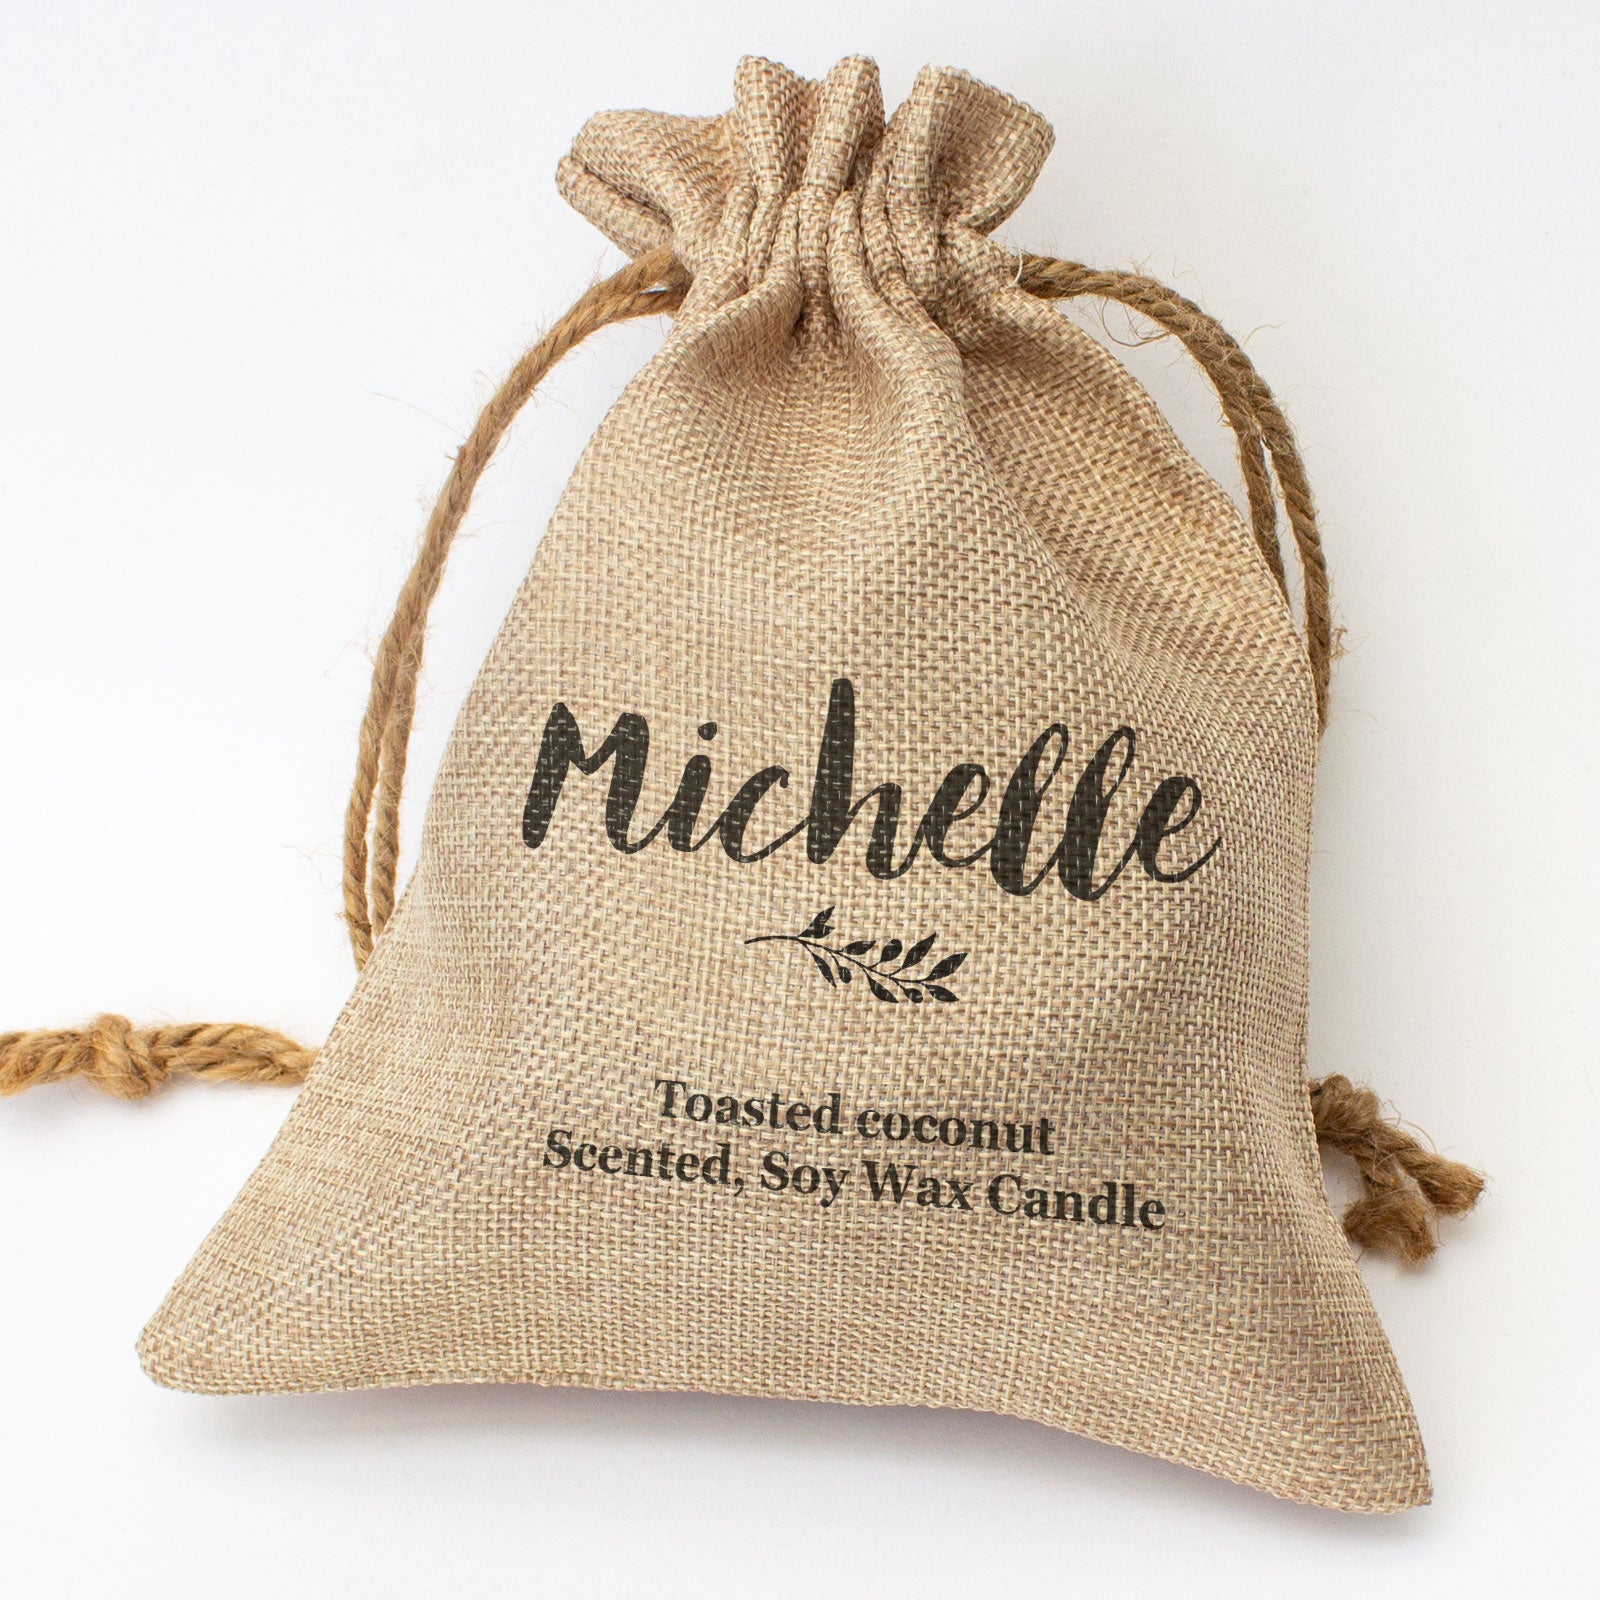 MICHELLE - Toasted Coconut Bowl Candle – Soy Wax - Gift Present